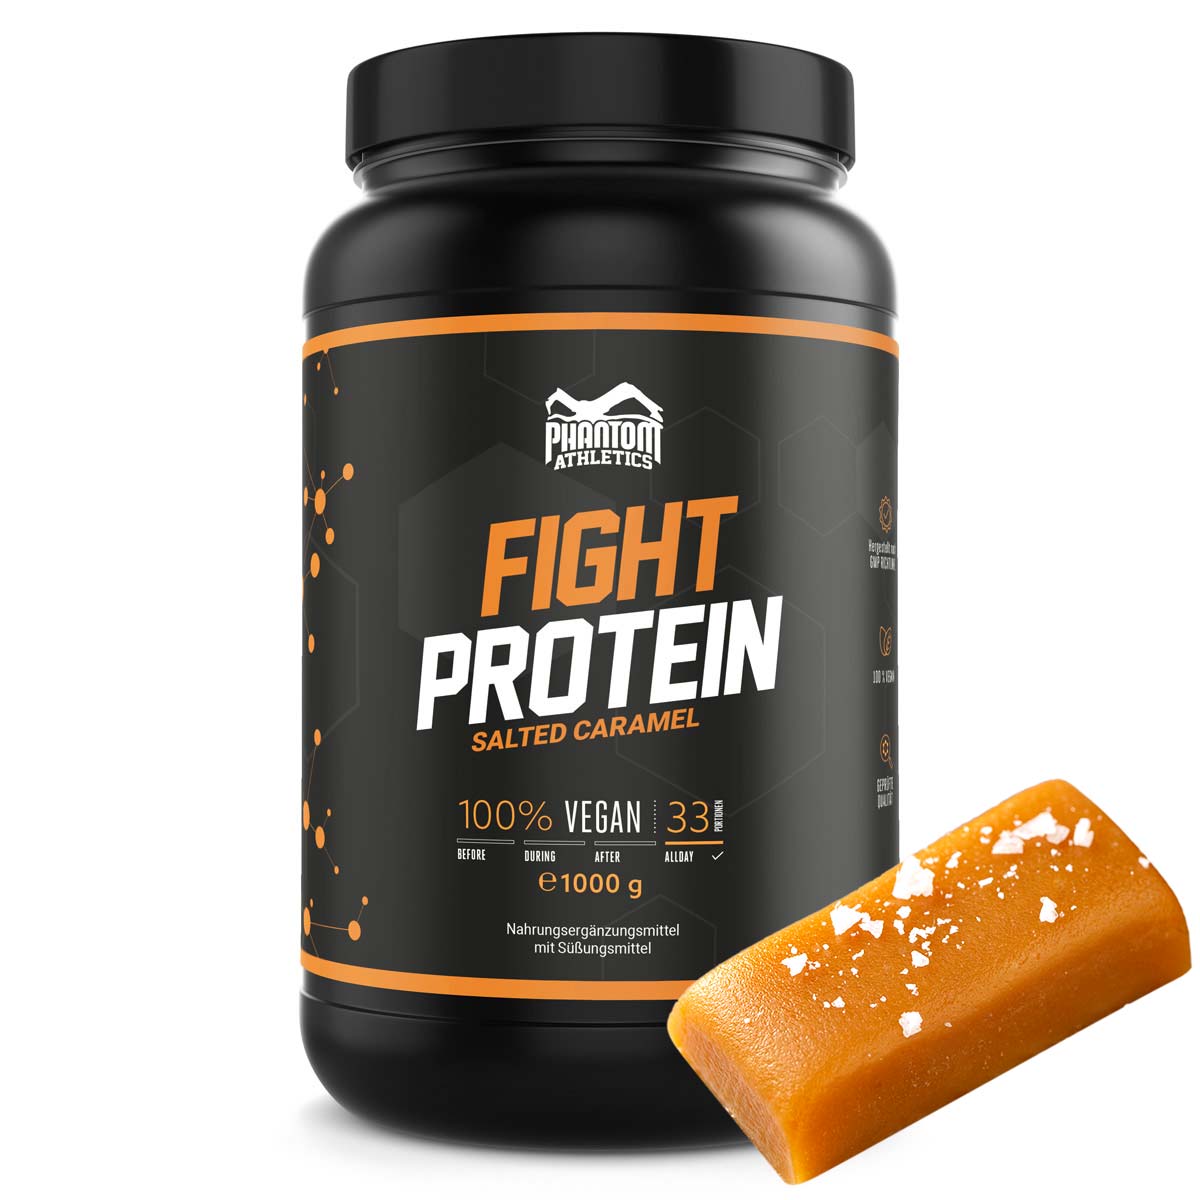 Phantom FIGHT protein for martial artists with salted caramel flavor.